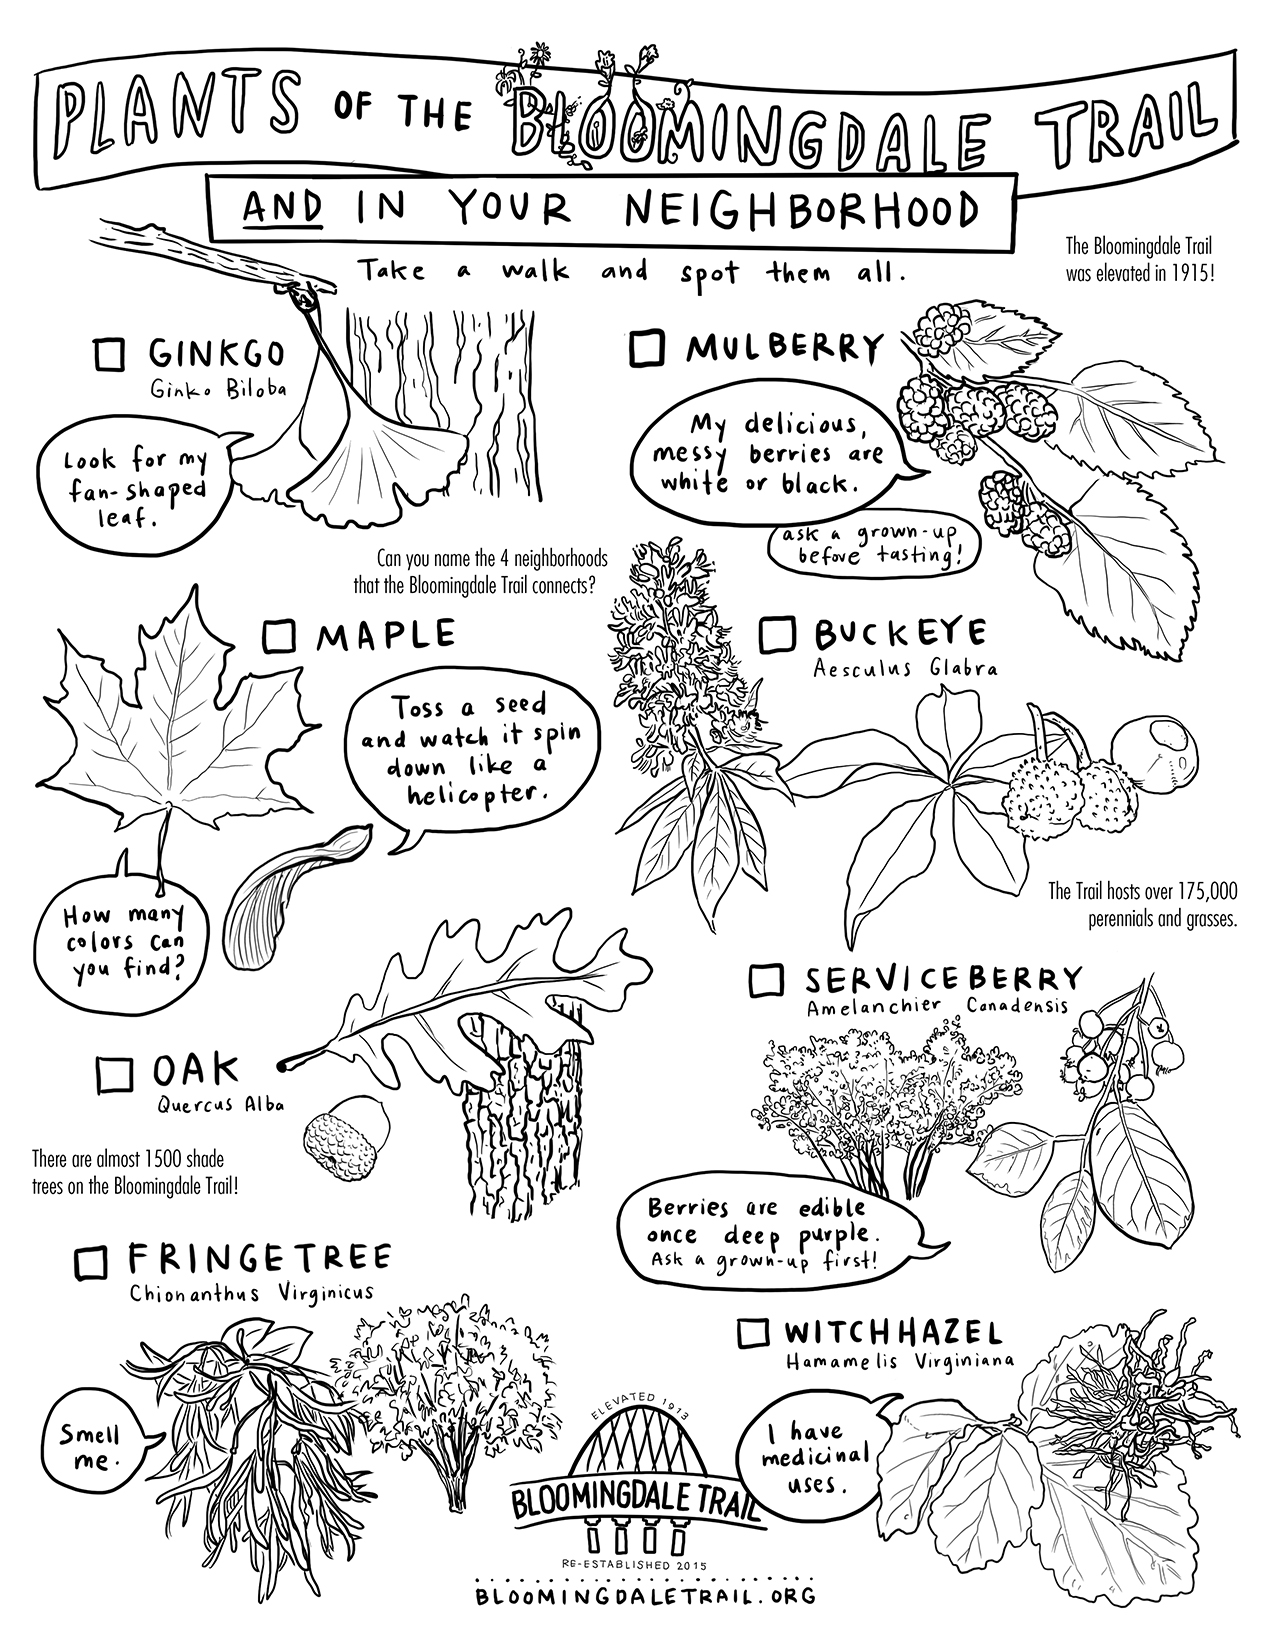 scavenger hunt with drawings of plants